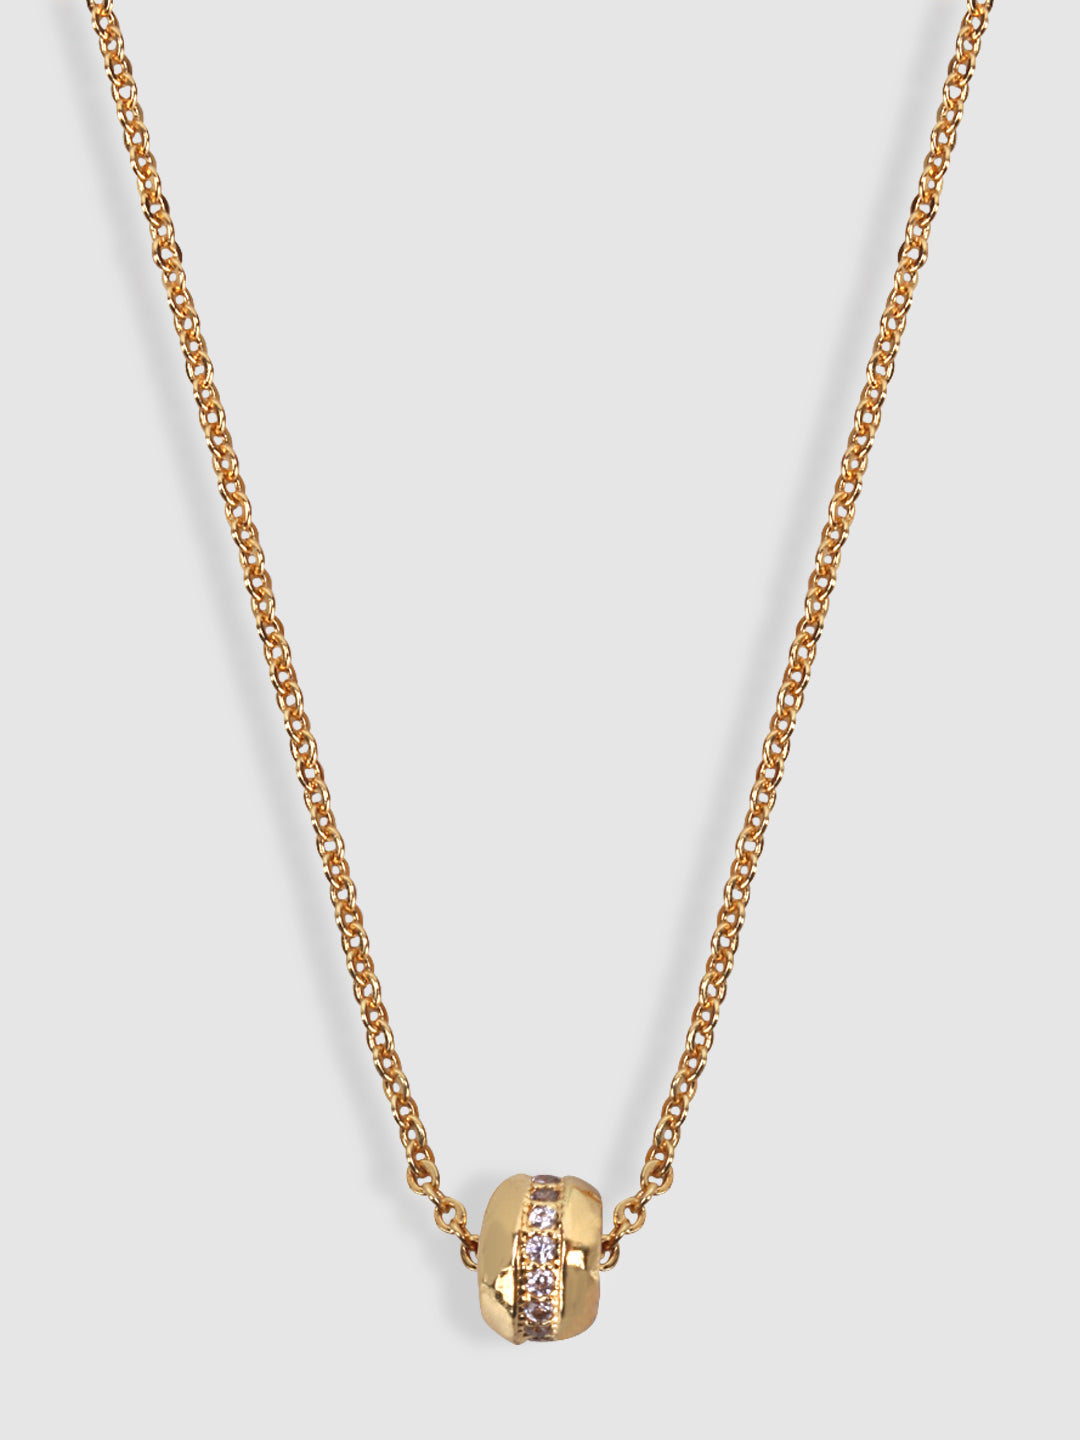 Gold-Toned & White Gold-Plated Handcrafted Necklace